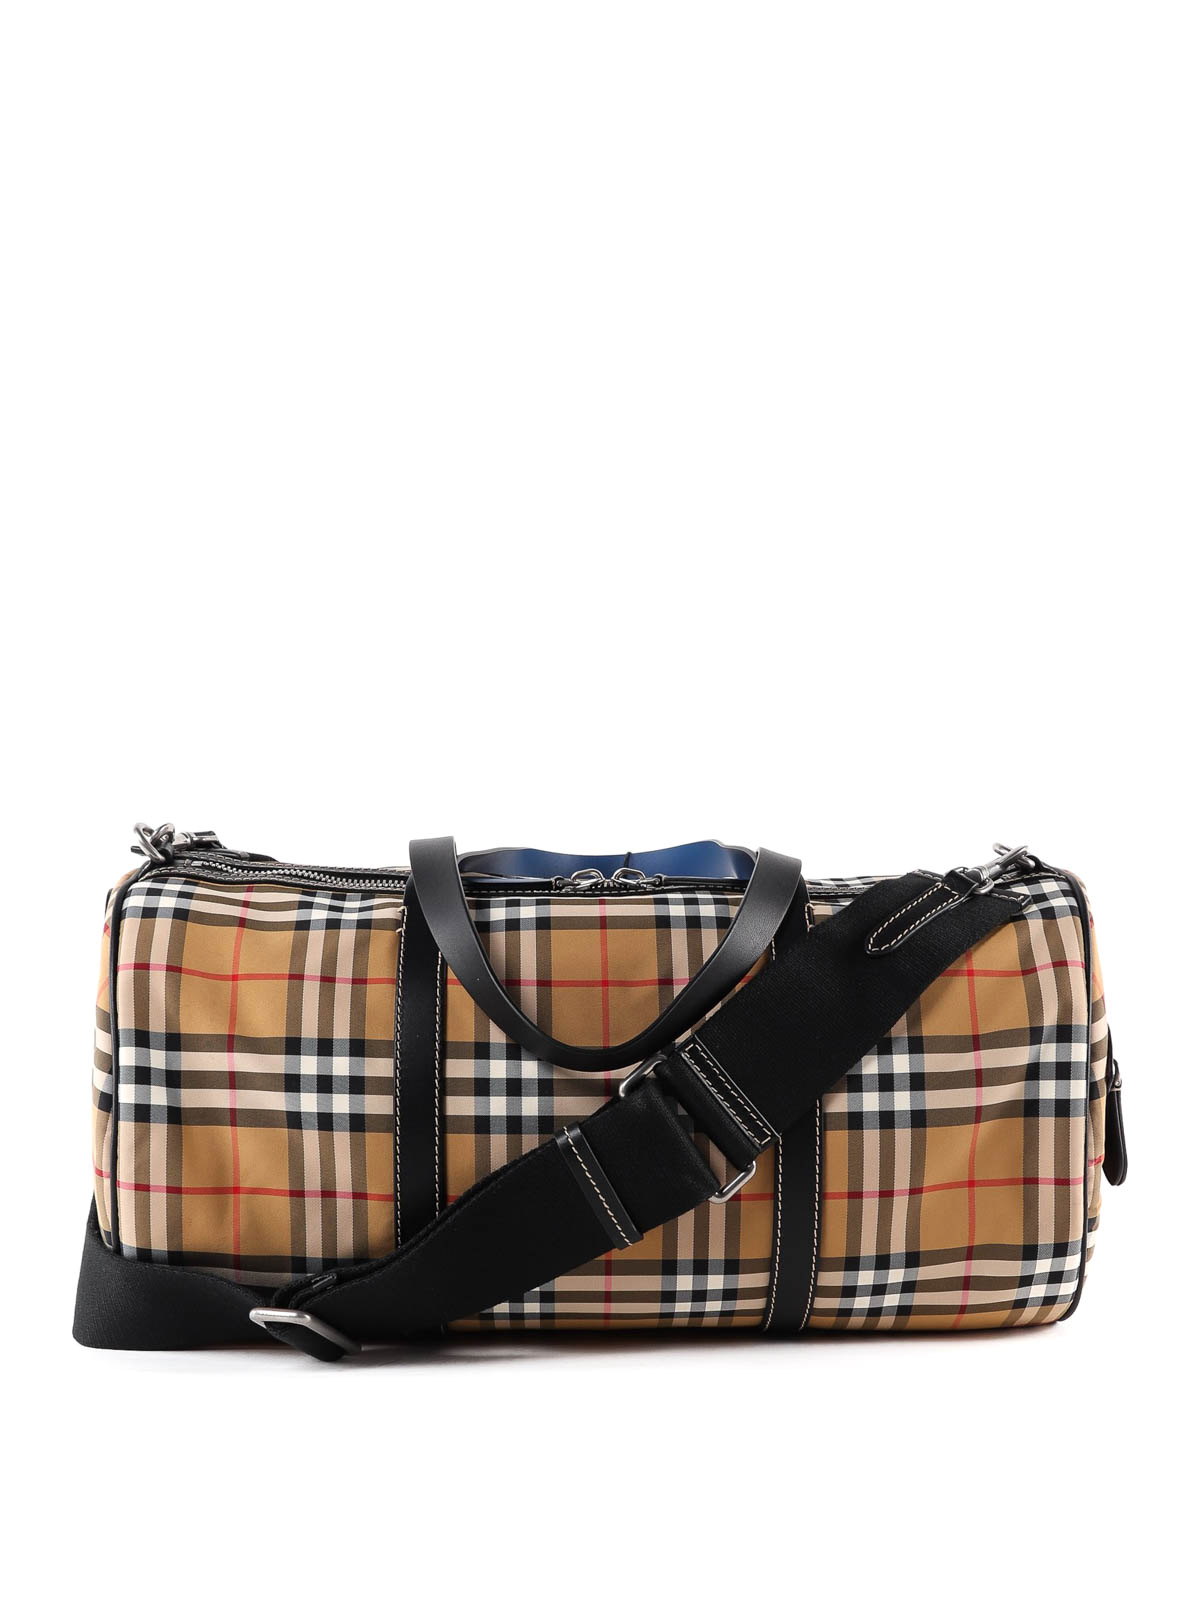 Burberry Large Kennedy Duffle Bag for Men